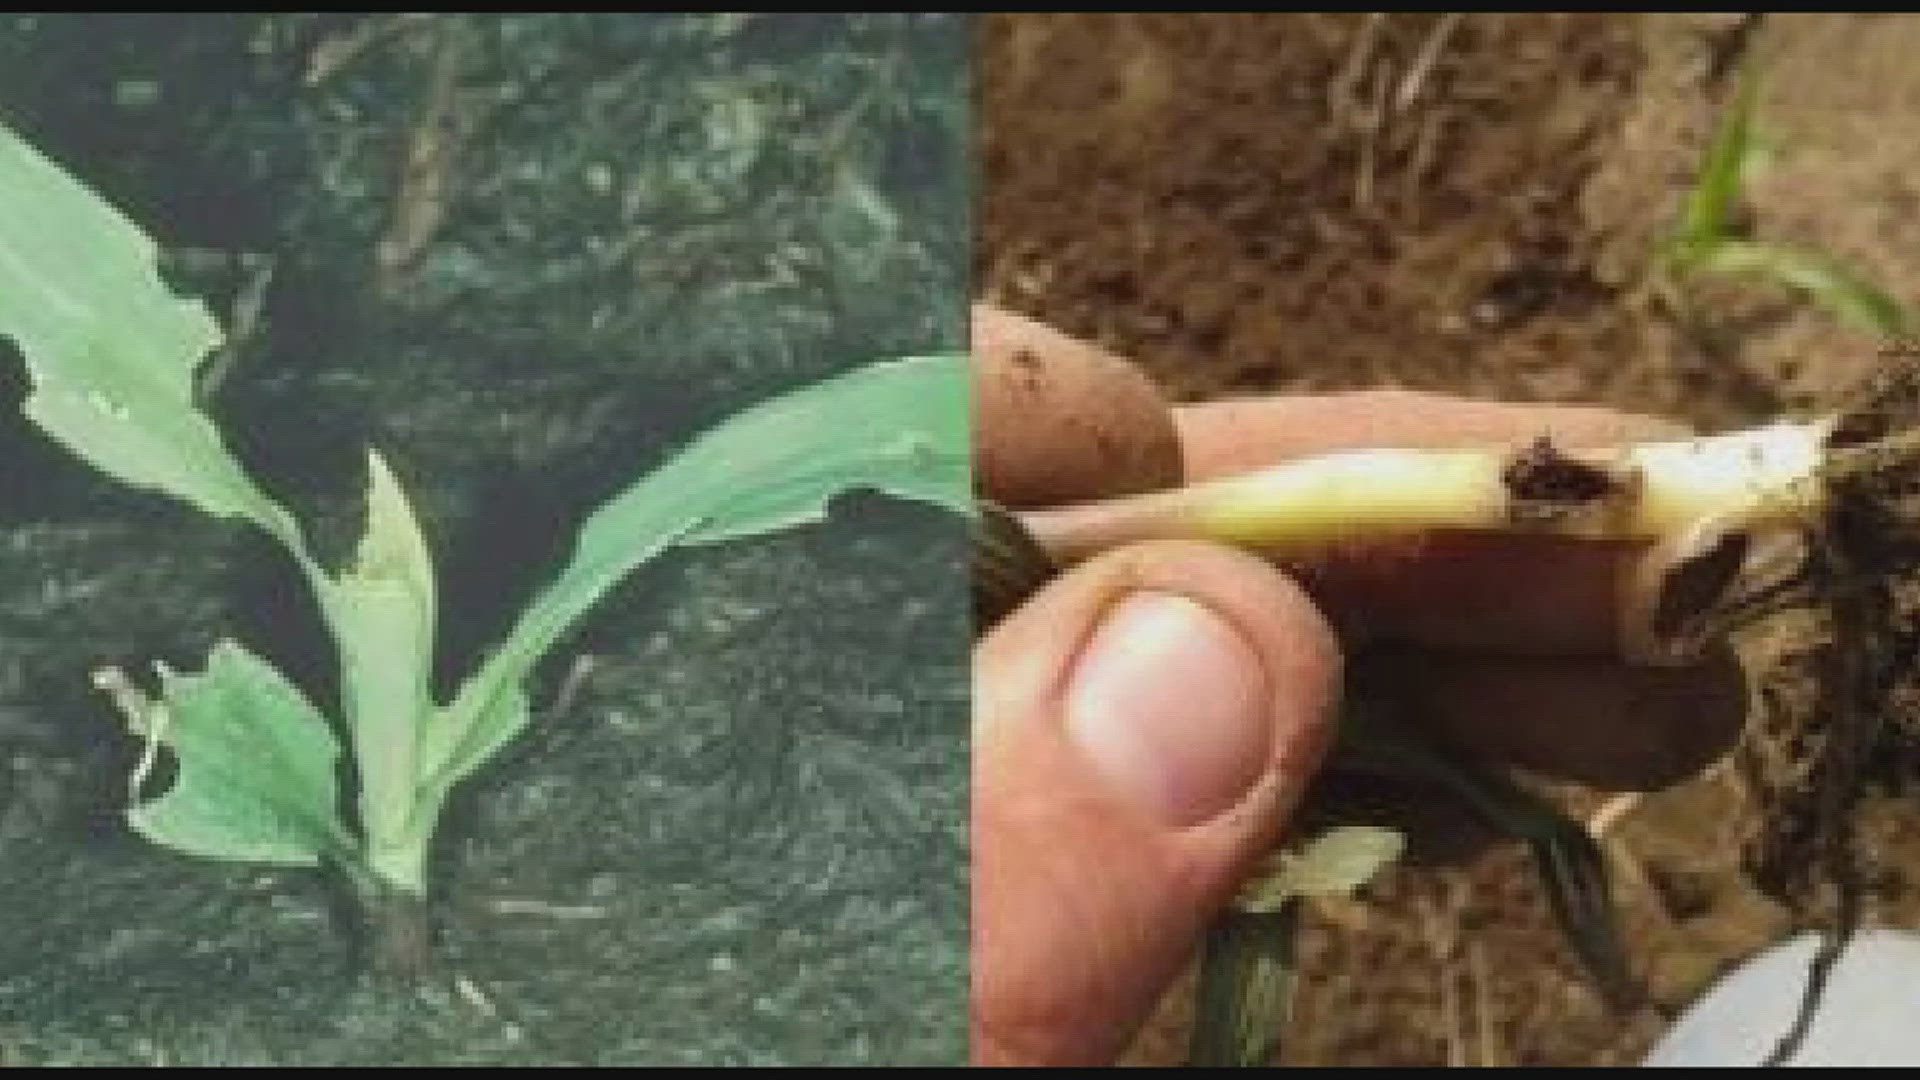 Virgil Schmitt, extension field agronomist for Iowa State, joined The Current on News 8 to talk about how black cutworms can negatively affect corn crops.